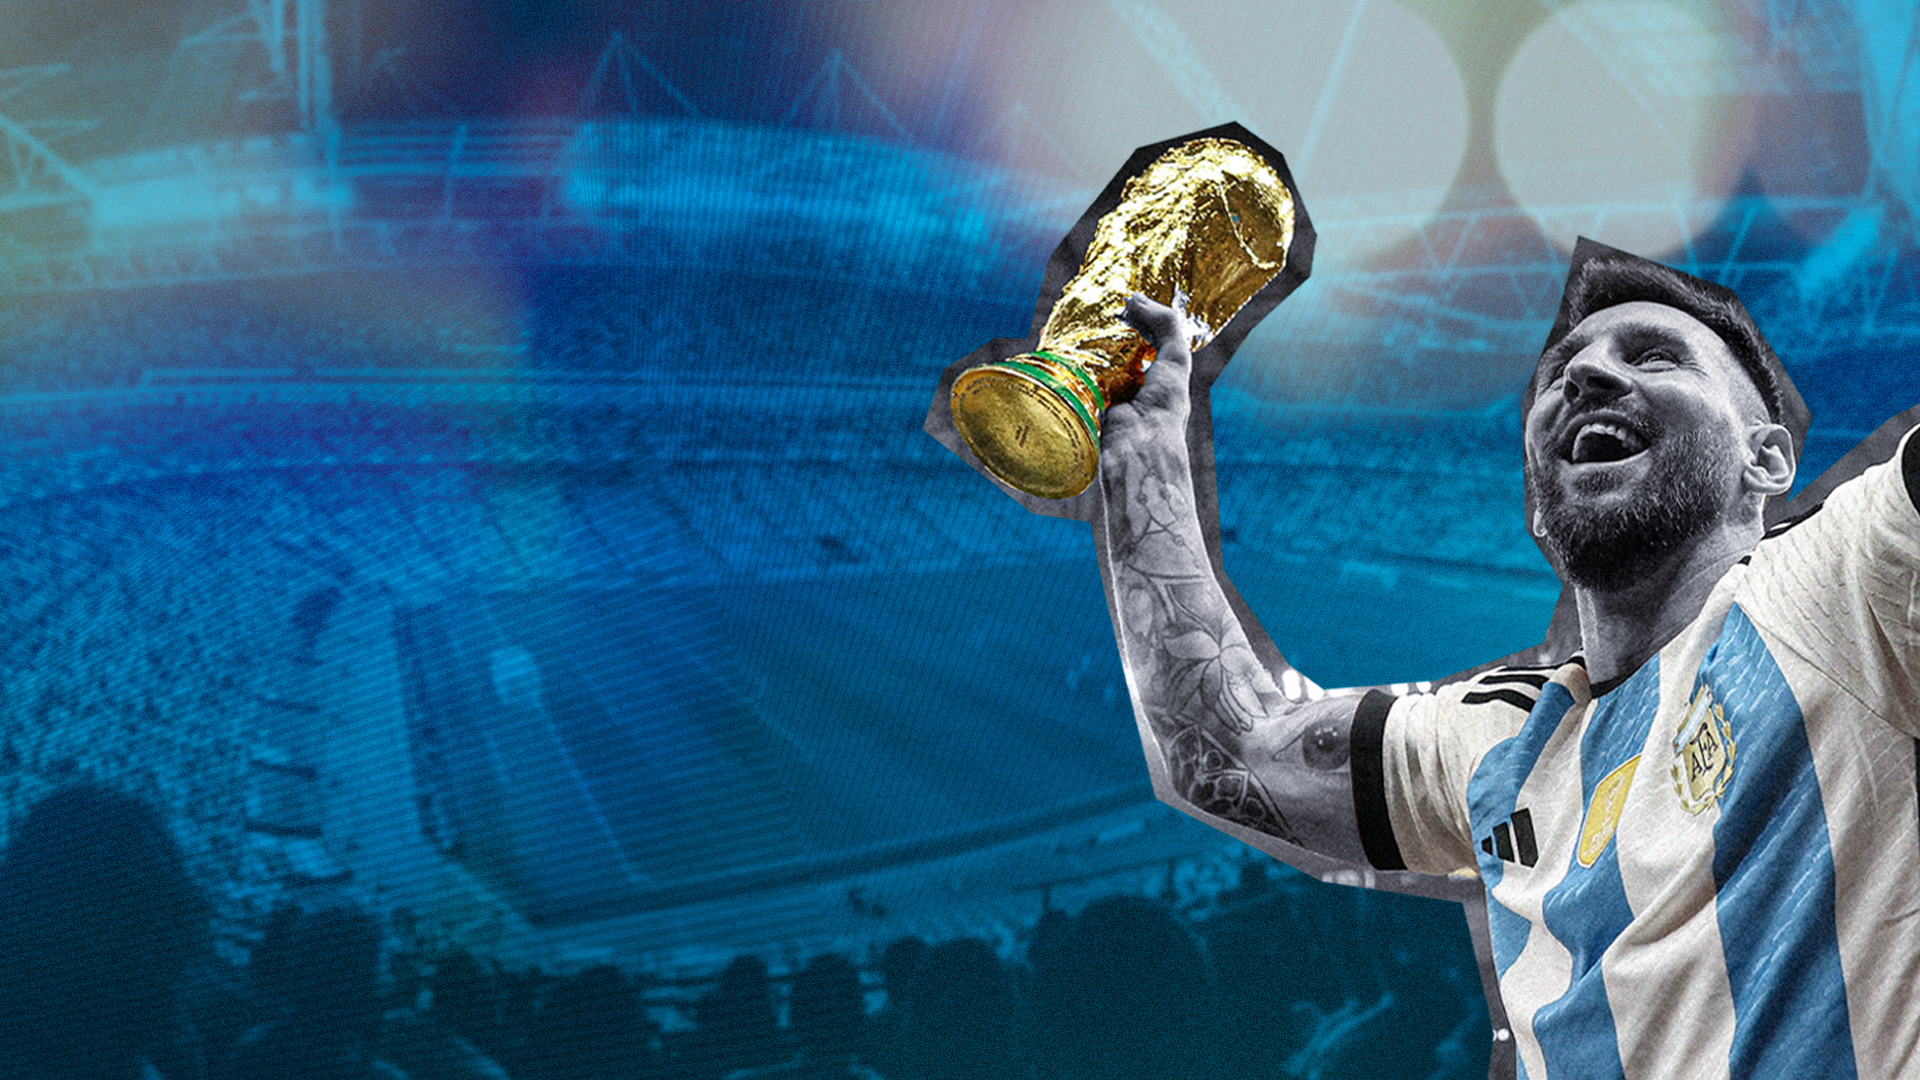 Messi holding the World Cup trophy Best images of Argentina becoming  champions